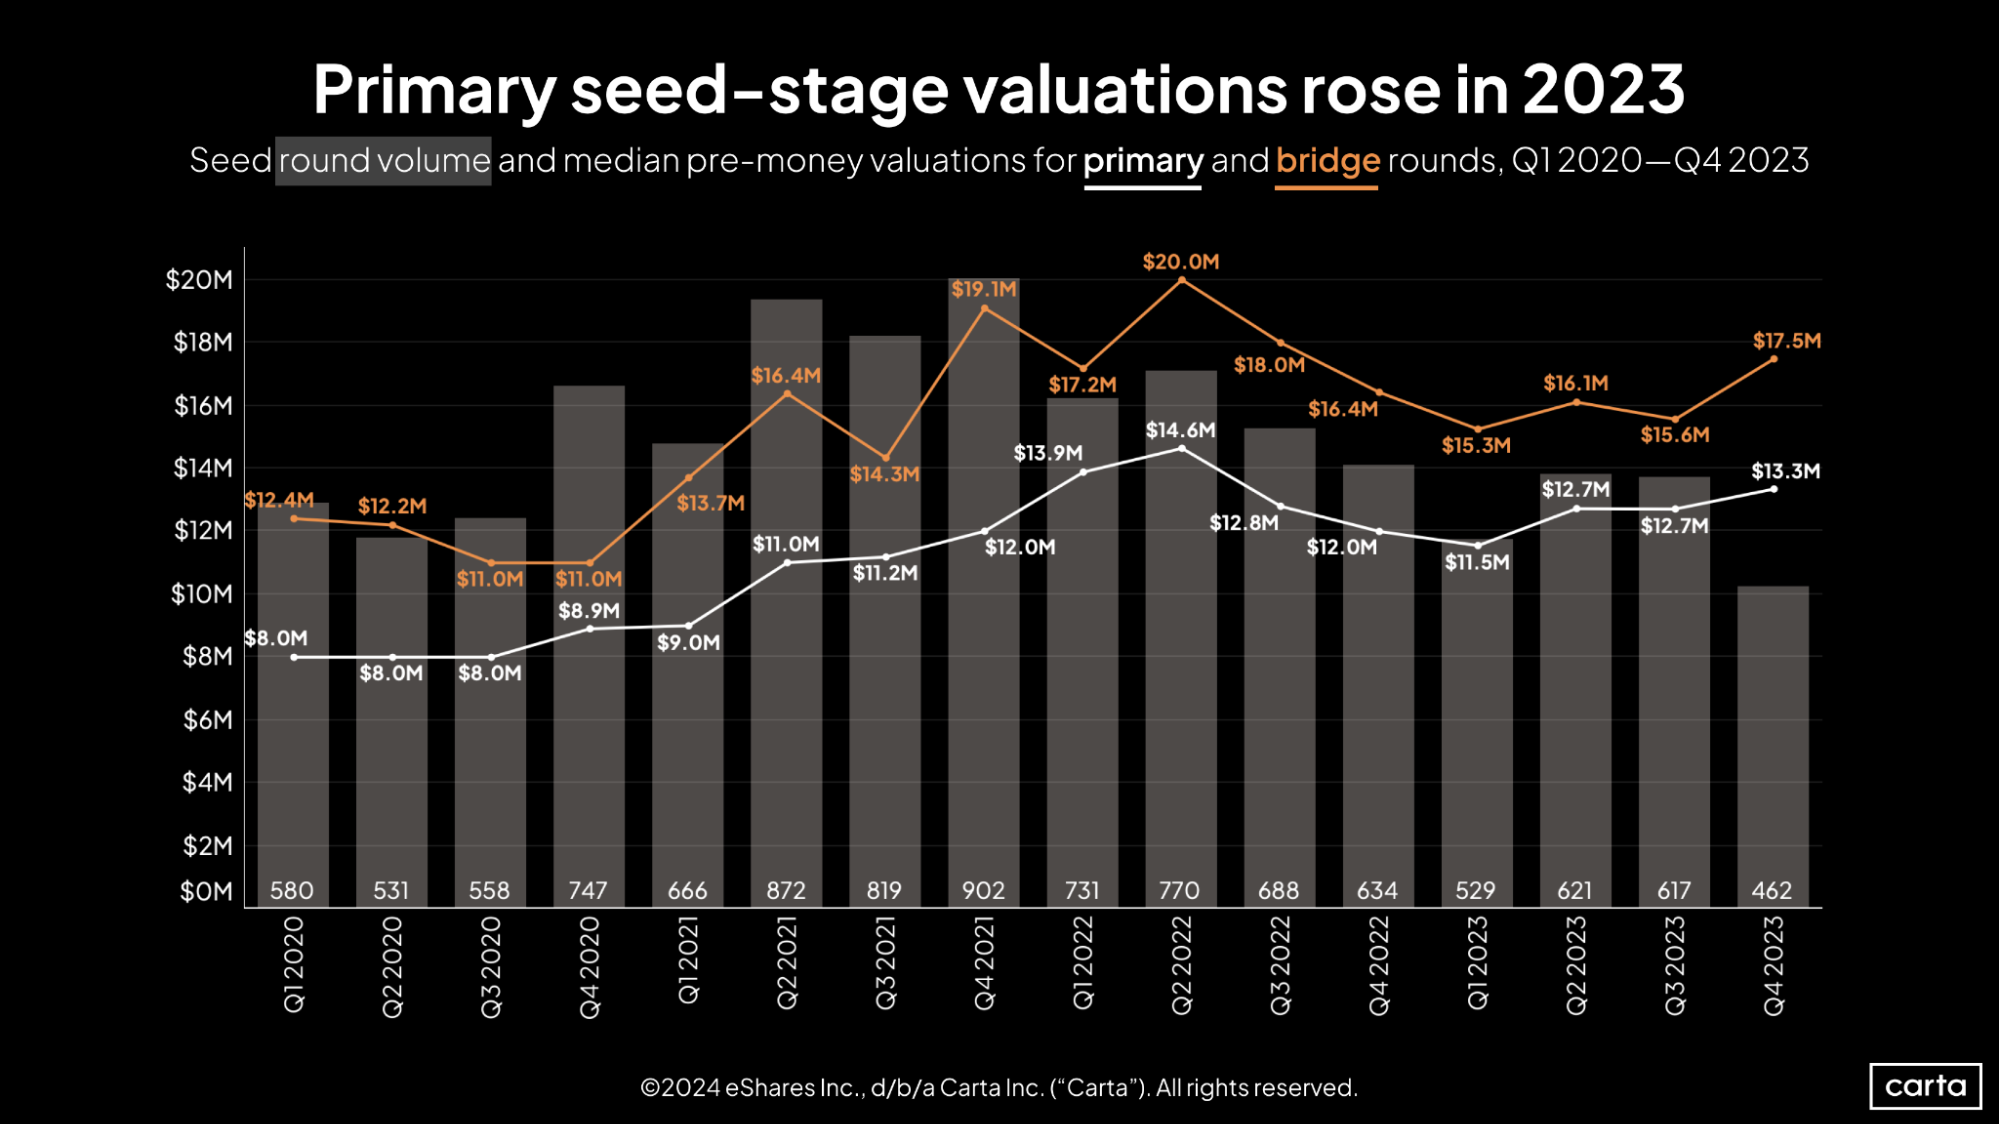 Carta SOPM Q4 2023 Primary seed-stage valuations rose in 2023